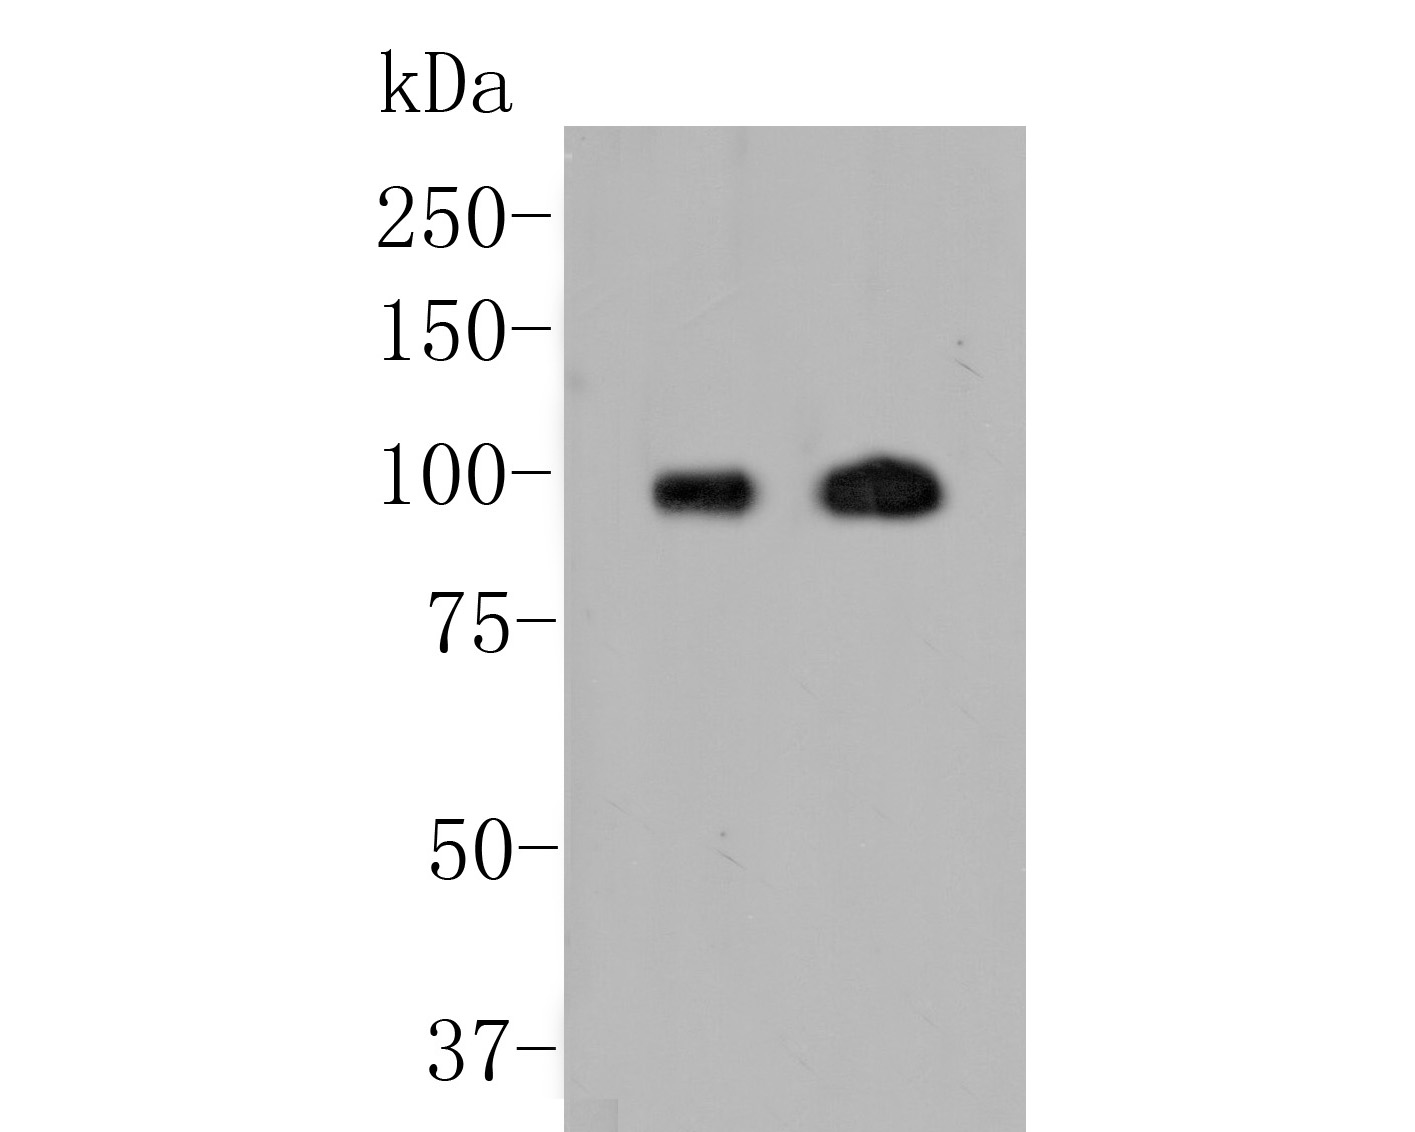 Western blot analysis of Androgen Receptor on different lysates. Proteins were transferred to a PVDF membrane and blocked with 5% BSA in PBS for 1 hour at room temperature. The primary antibody (ER2001-34, 1/500) was used in 5% BSA at room temperature for 2 hours. Goat Anti-Rabbit IgG - HRP Secondary Antibody (HA1001) at 1:5,000 dilution was used for 1 hour at room temperature.<br />
Positive control: <br />
Lane 1: Human skeletal muscle tissue lysate<br />
Lane 2: Rat heart tissue lysate